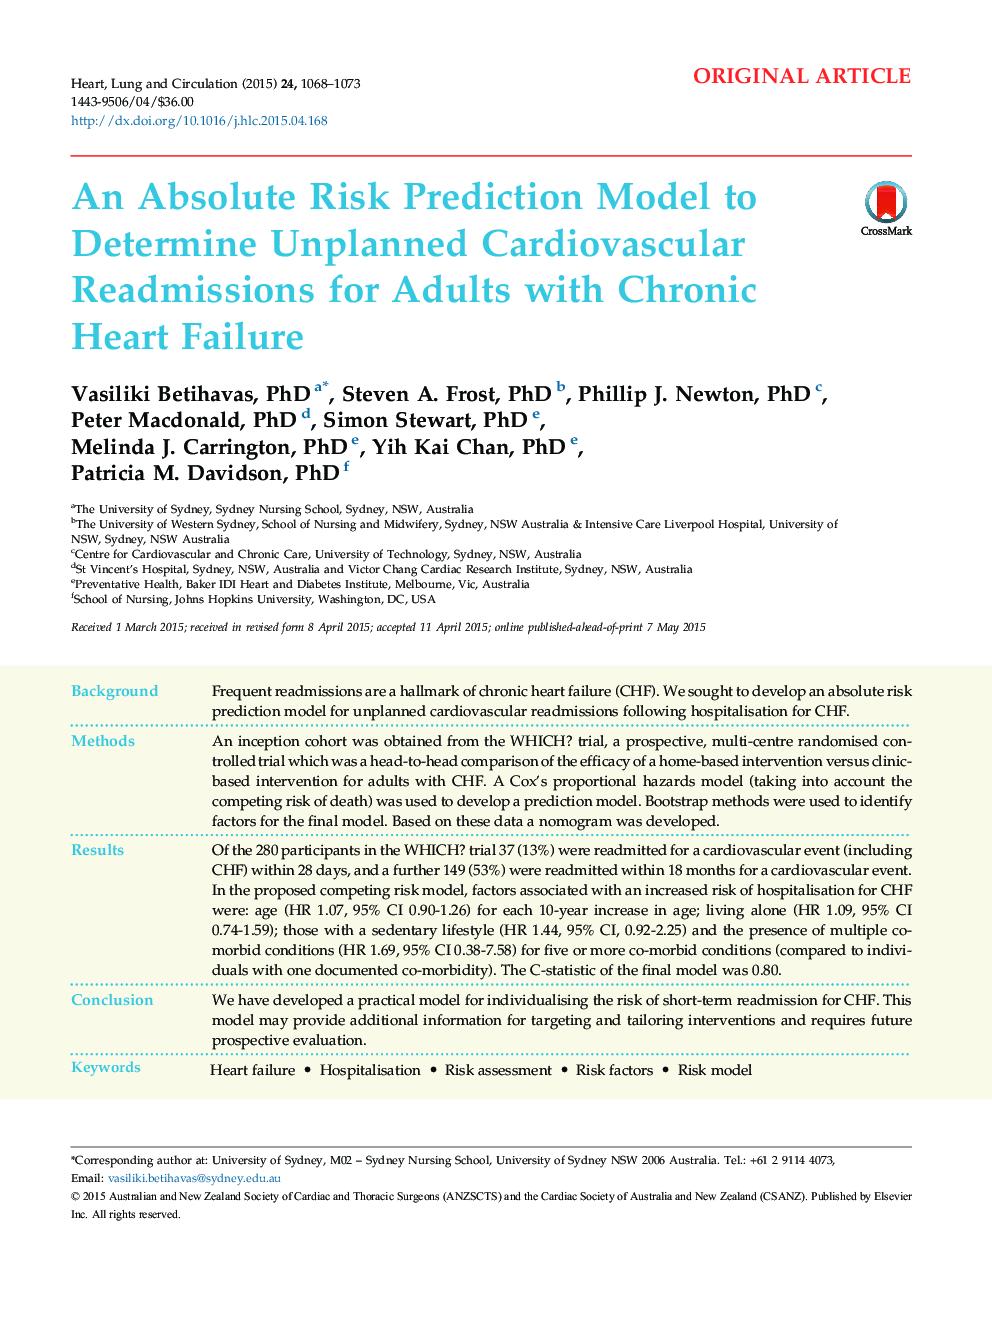 An Absolute Risk Prediction Model to Determine Unplanned Cardiovascular Readmissions for Adults with Chronic Heart Failure